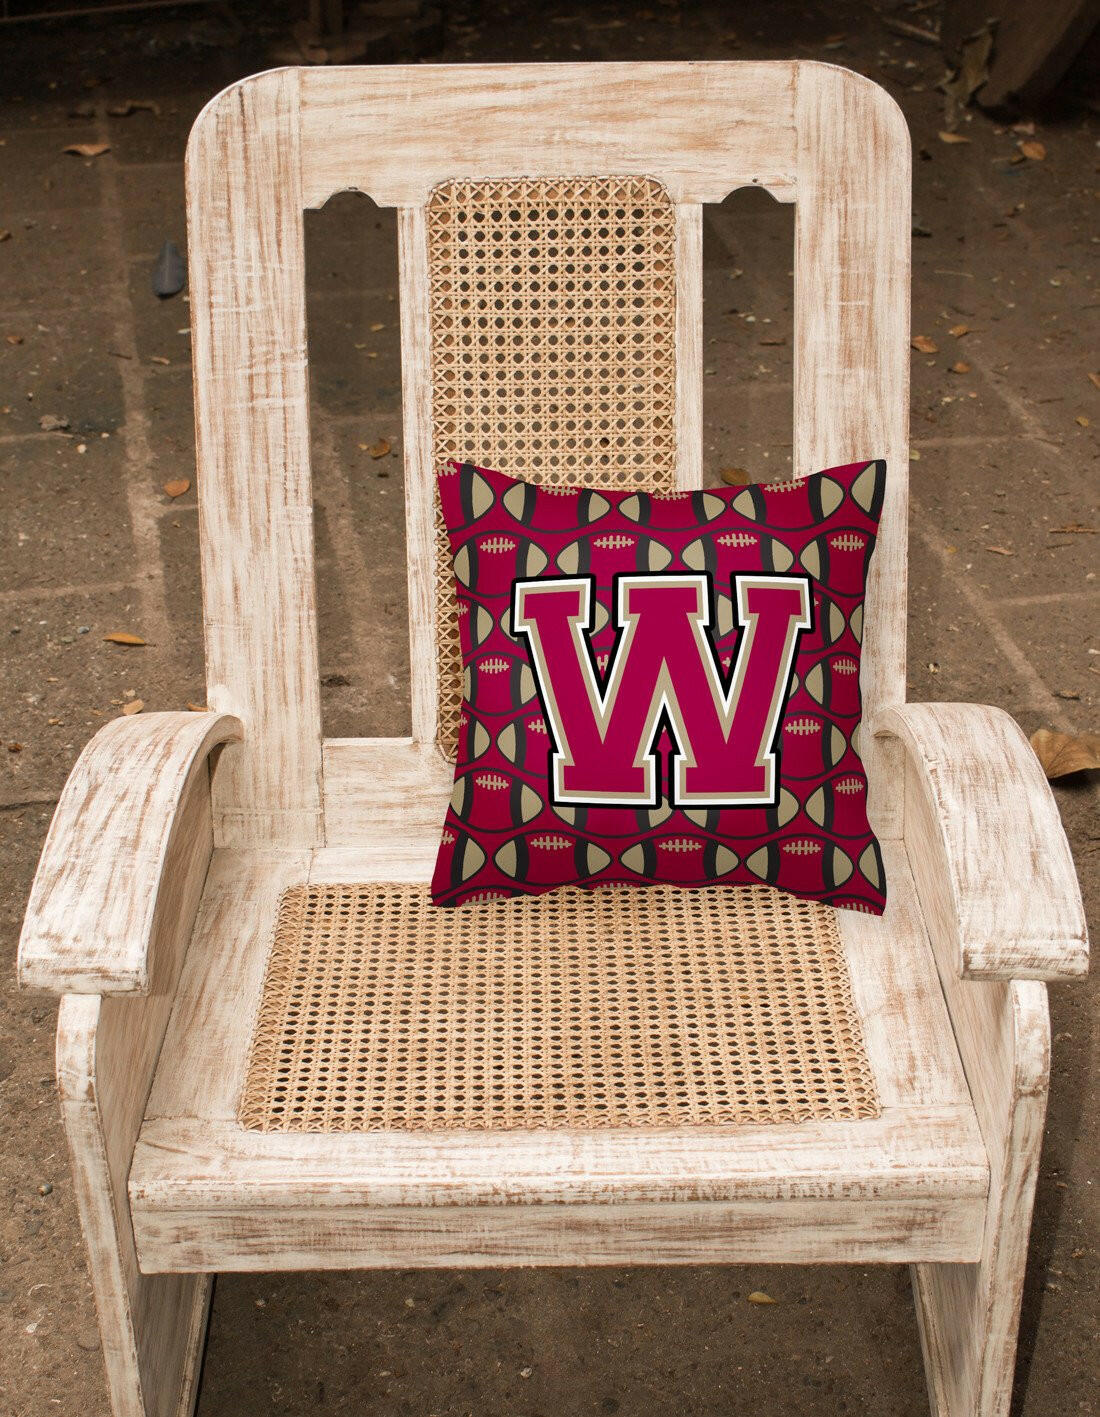 Letter W Football Garnet and Gold Fabric Decorative Pillow CJ1078-WPW1414 by Caroline's Treasures